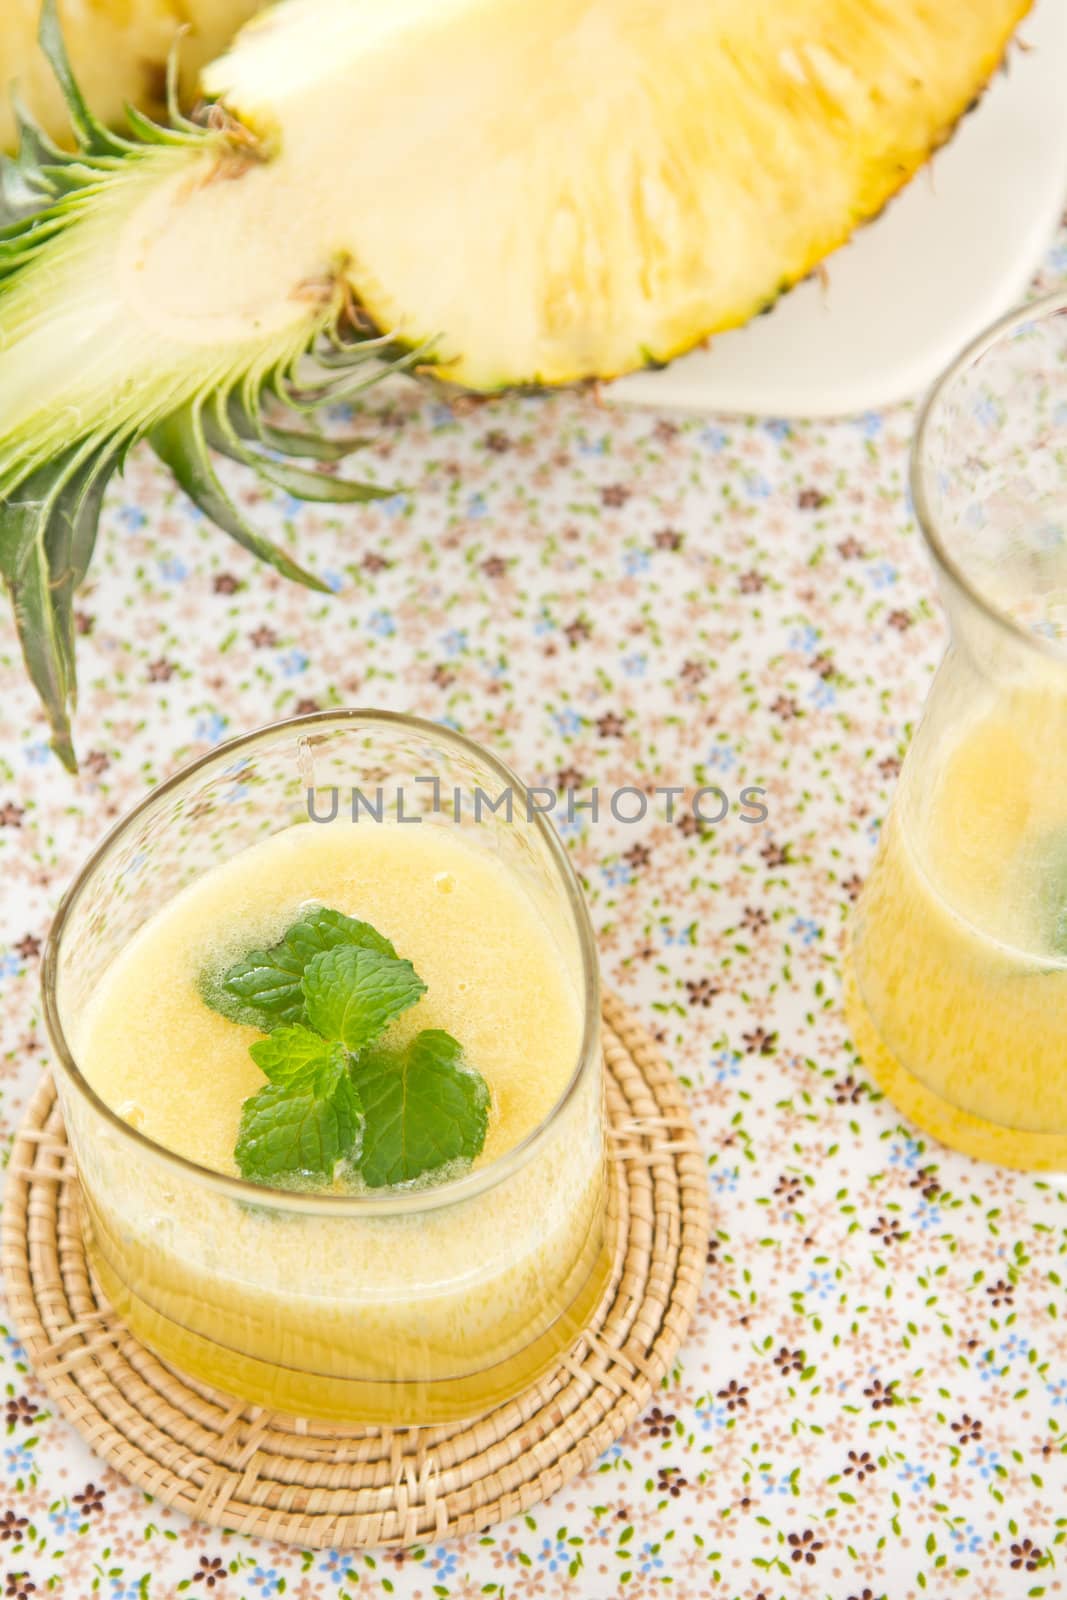 Pineapple juice [smoothie] with mint on top by fresh pineapple